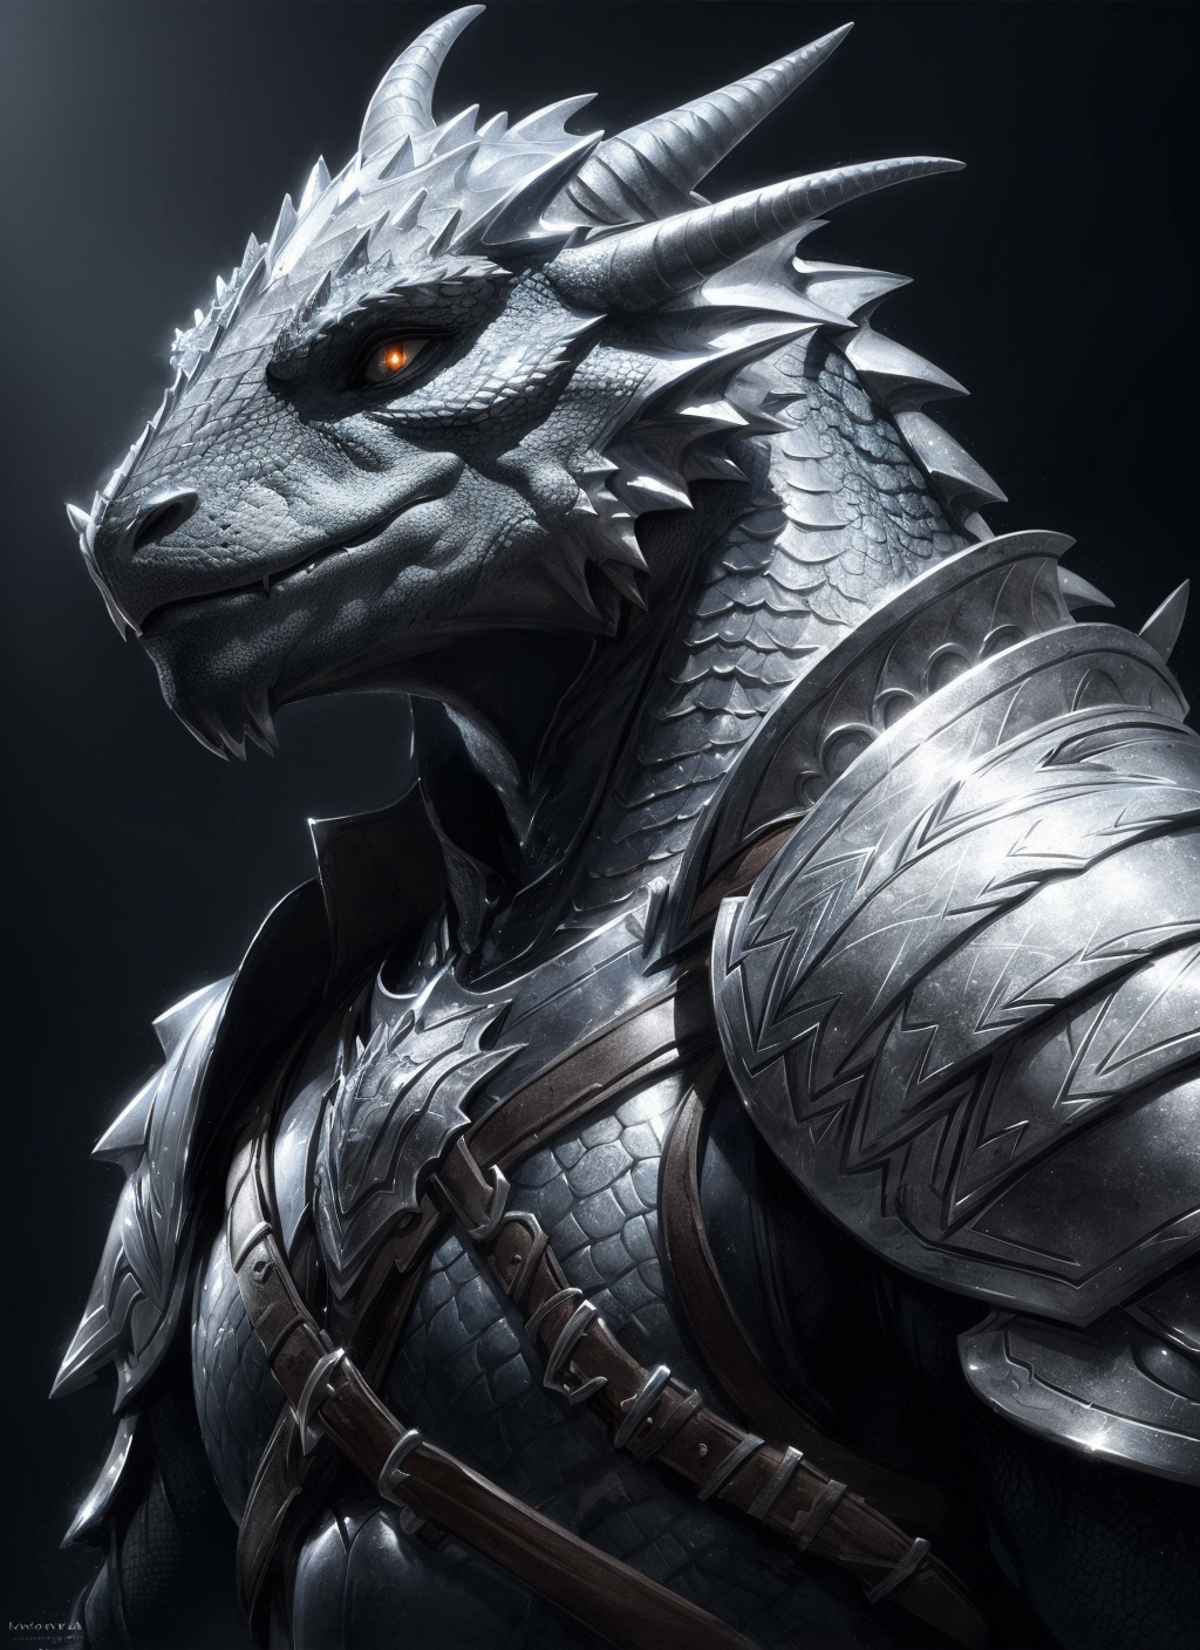 The head of a silver dragon with red eyes.